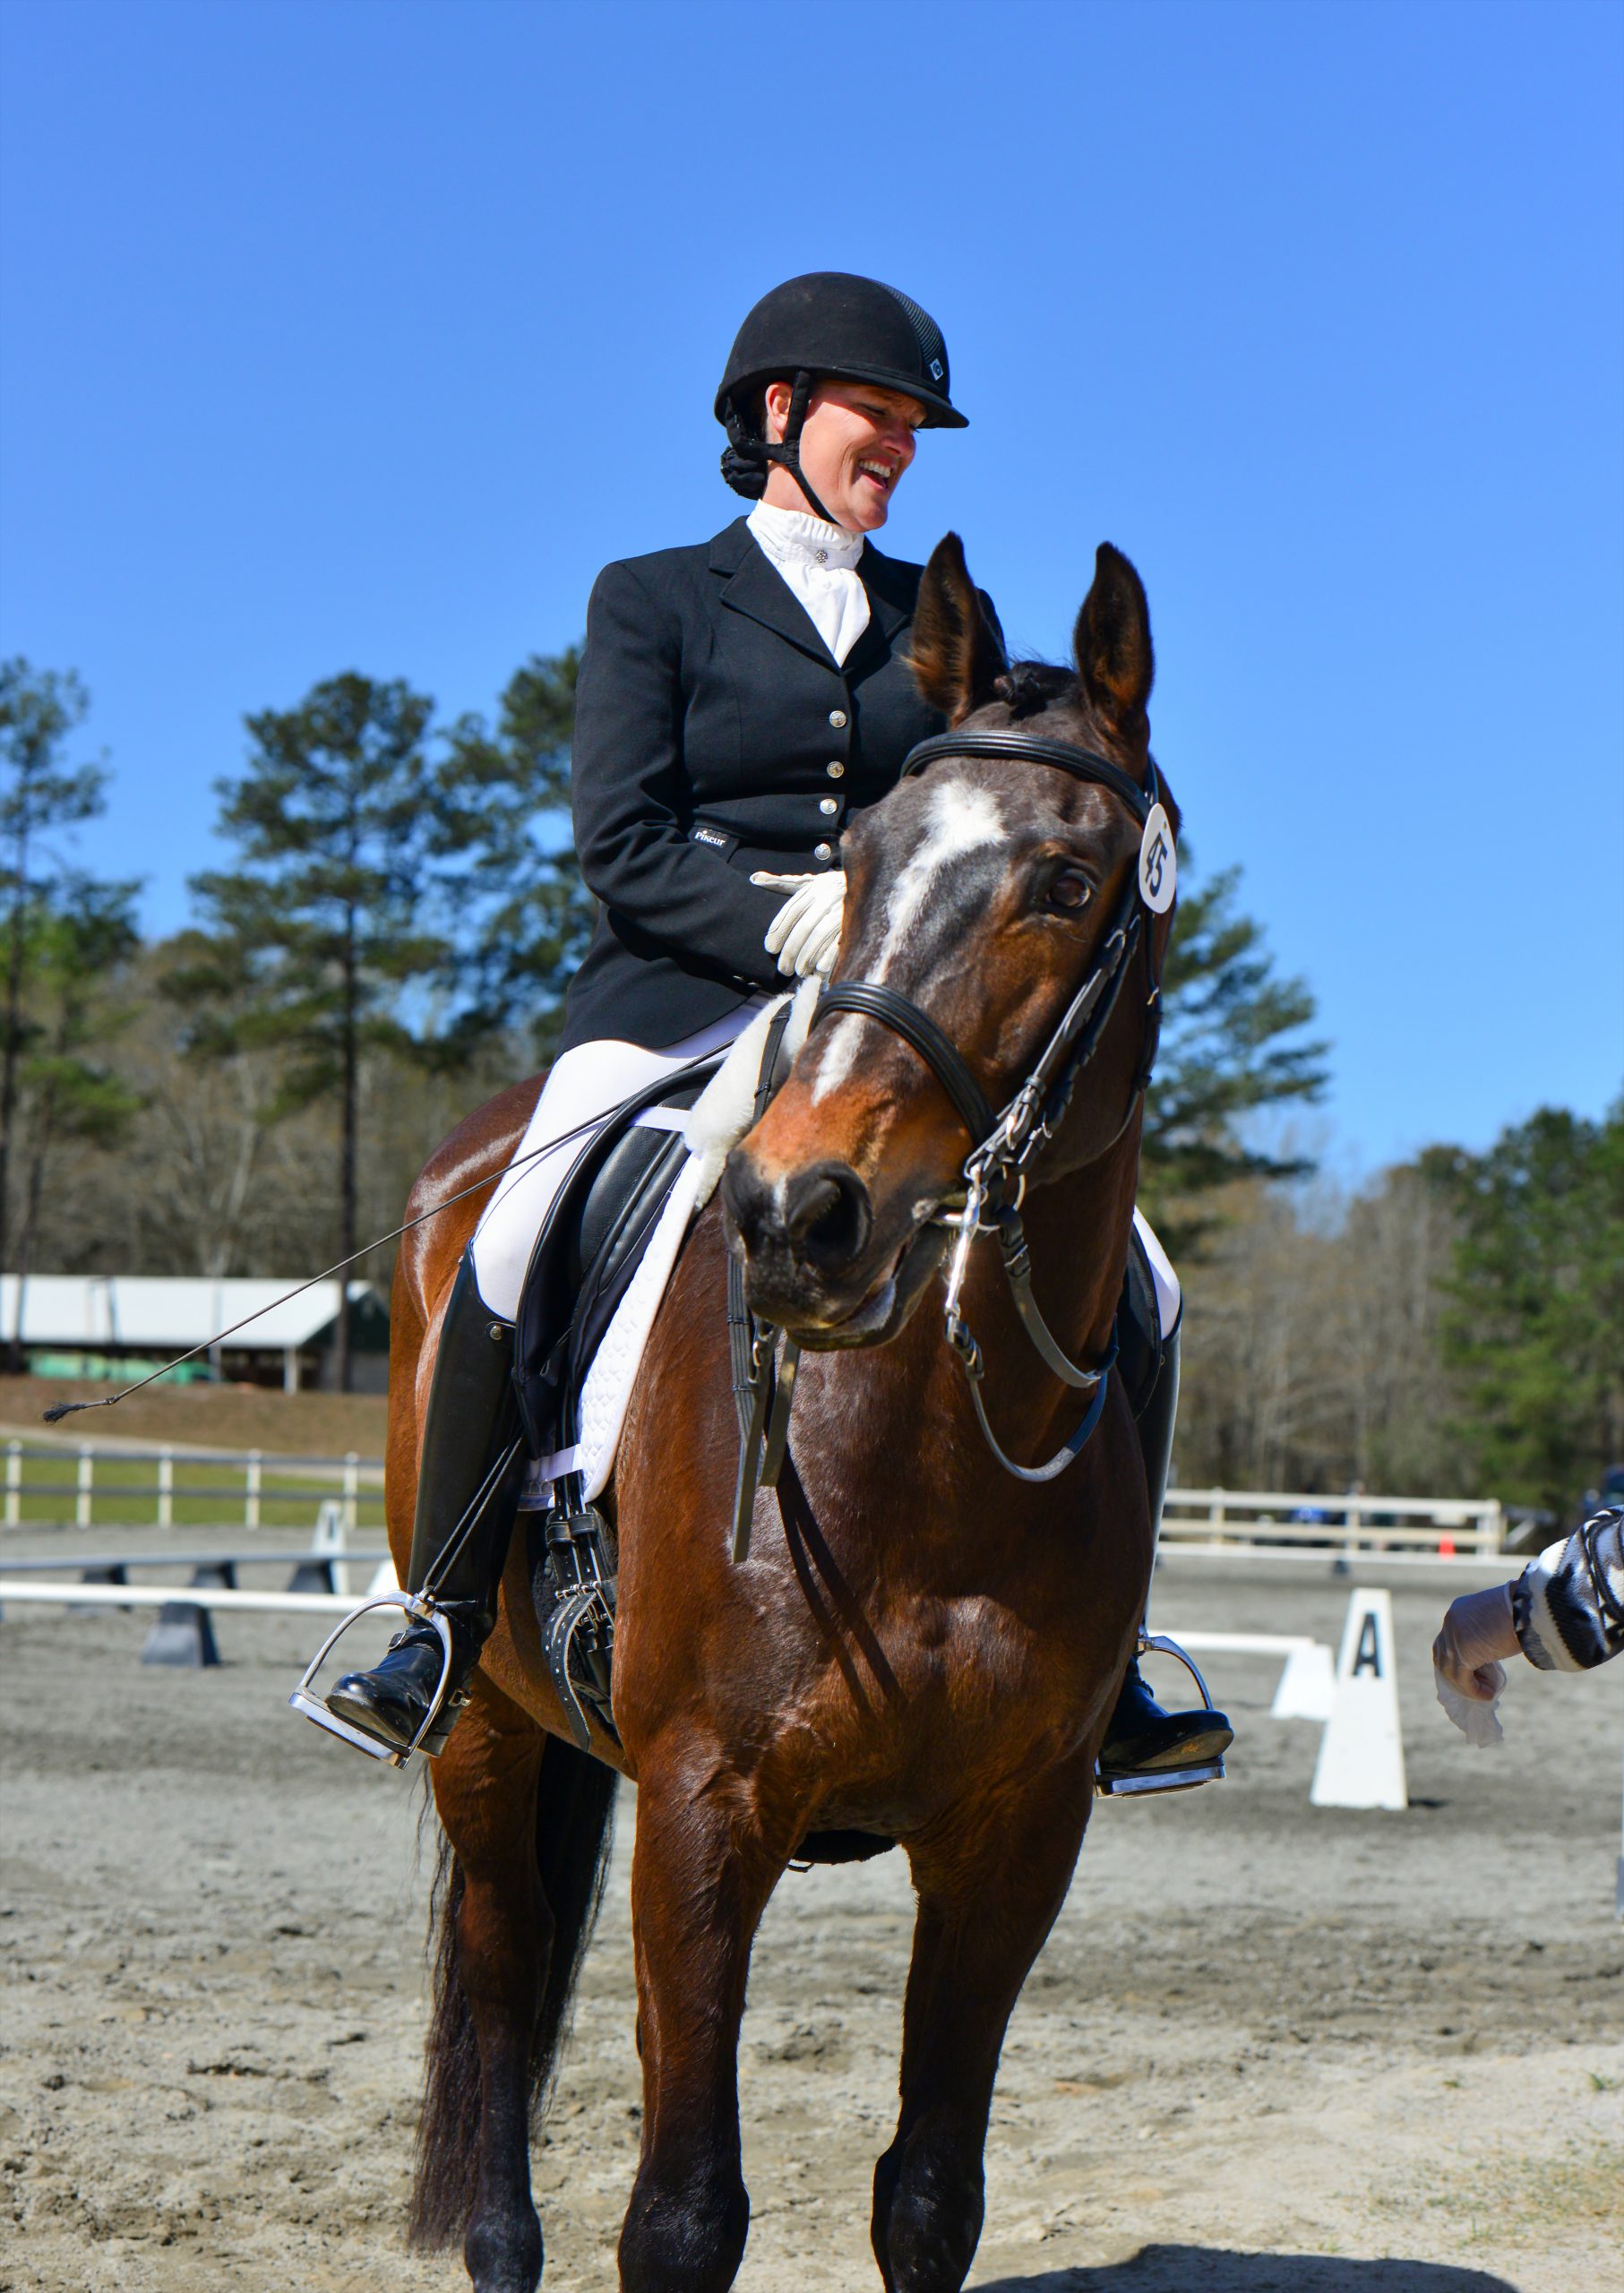 Jill competes on her horse, Manny. Basic dressage requirements include mastery of three standard gaits: a four-beat walk, a two-beat trot, and a three-beat canter. The rider must learn to balance and move in the saddle in such a way that the points where the body makes contact with the horse — called “aids” in dressage lingo — give direction through the manipulation of seat, legs, and hands. Photography courtesy of kmaginnis